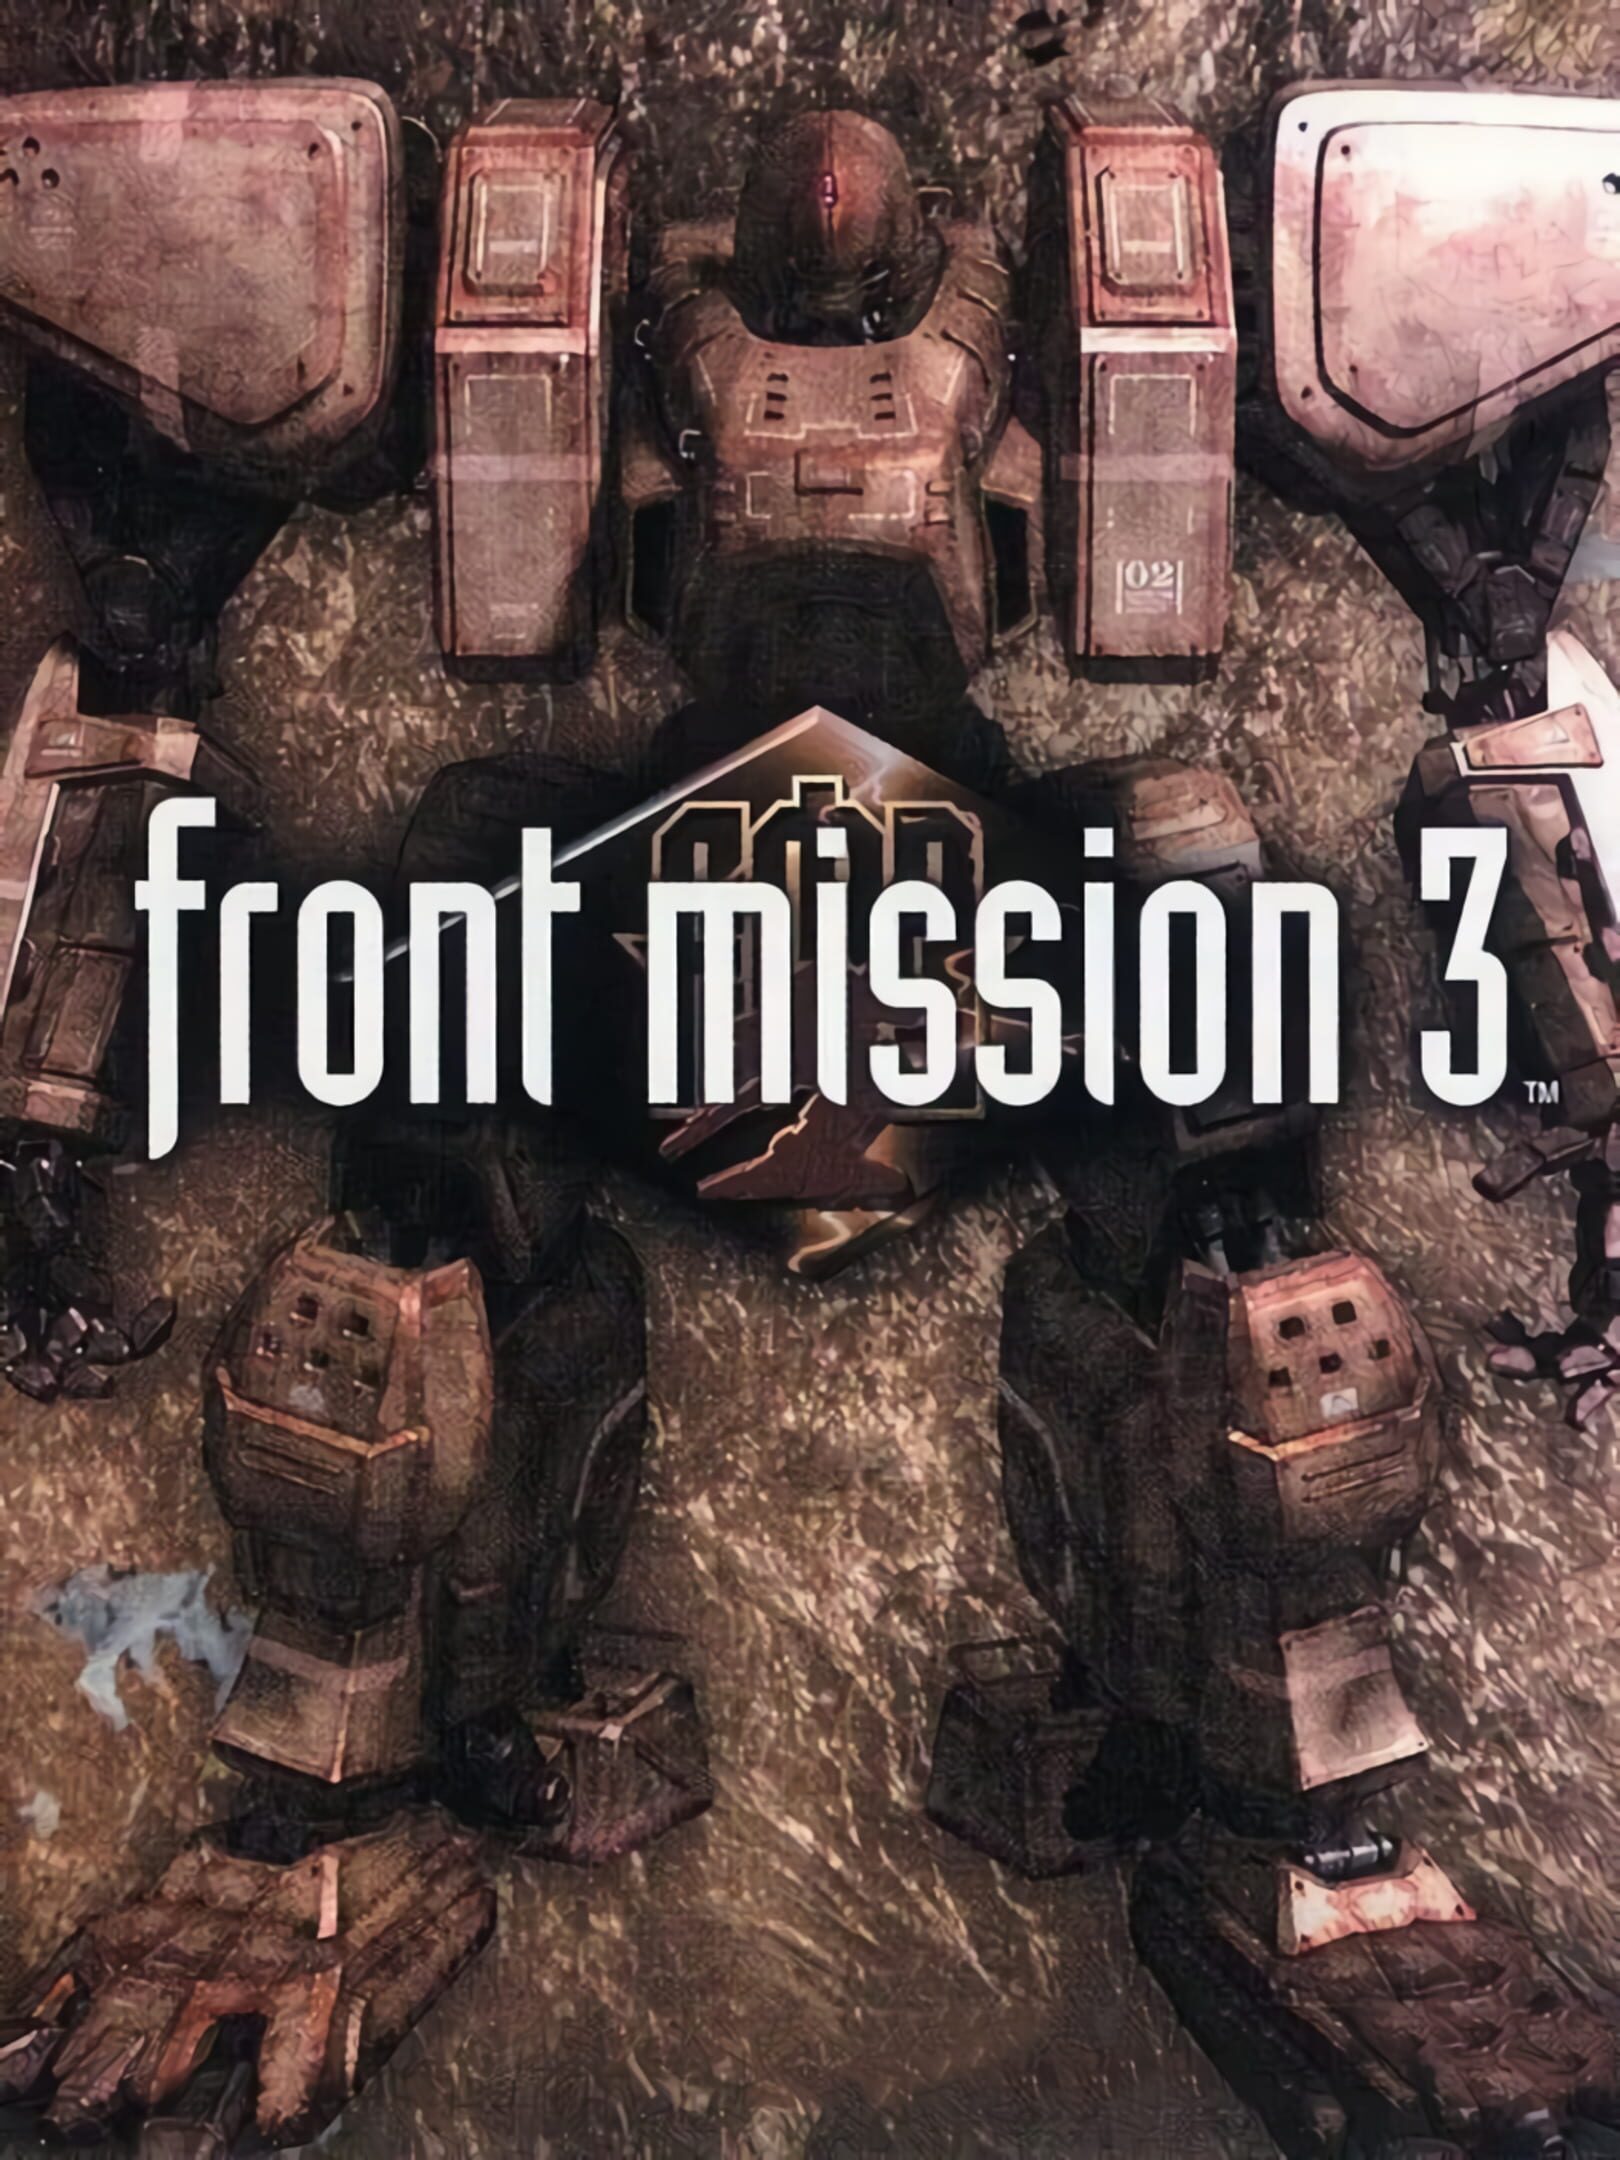 Front Mission 3 News, Guides, Walkthrough, Screenshots, and 